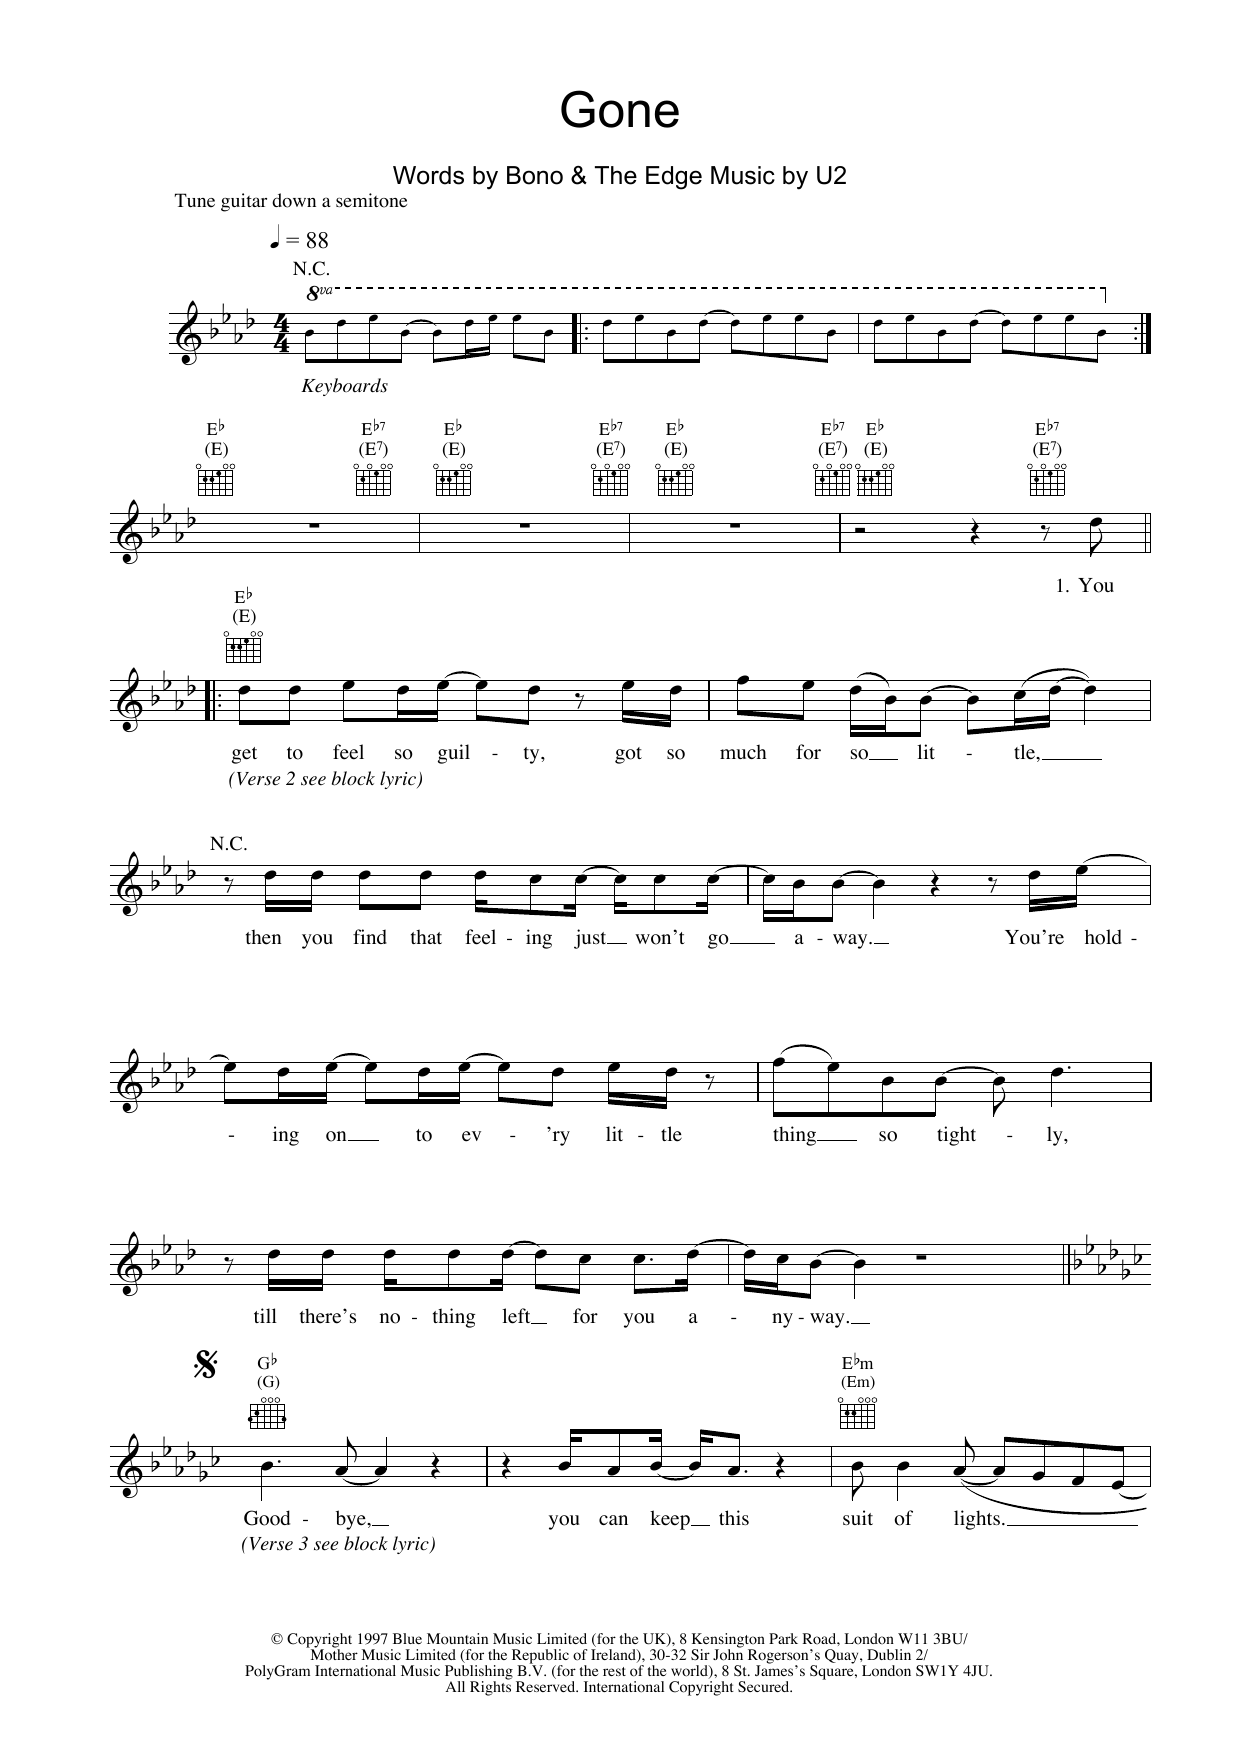 U2 Gone sheet music notes and chords. Download Printable PDF.